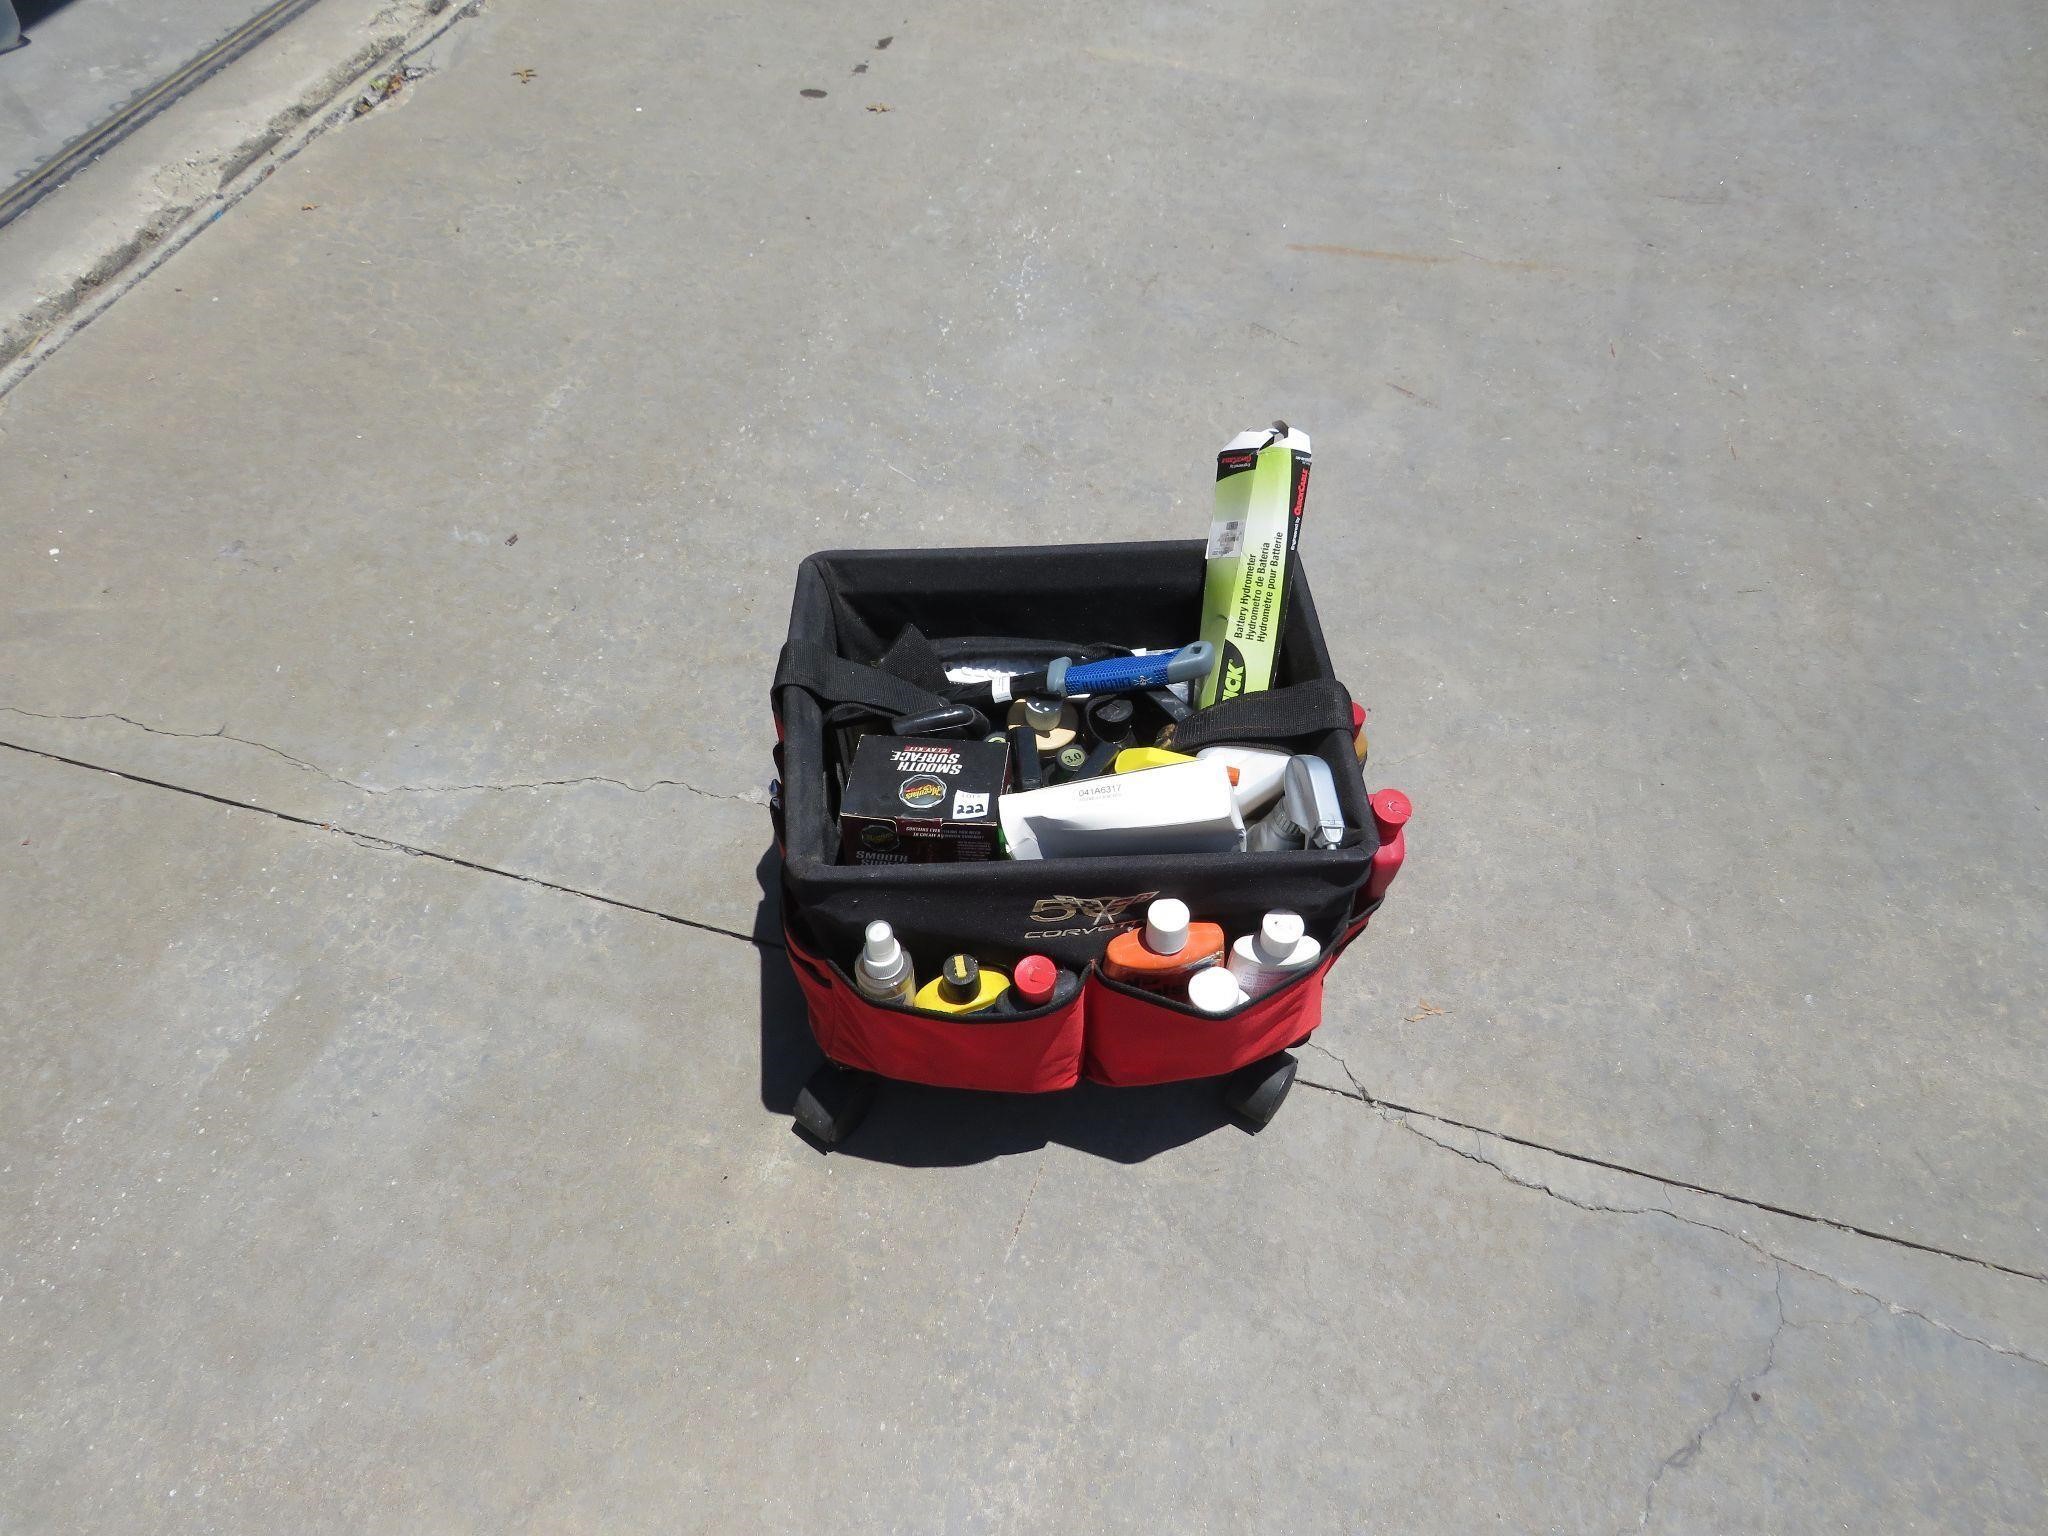 Yard Dolly packed full of cleaning supplies